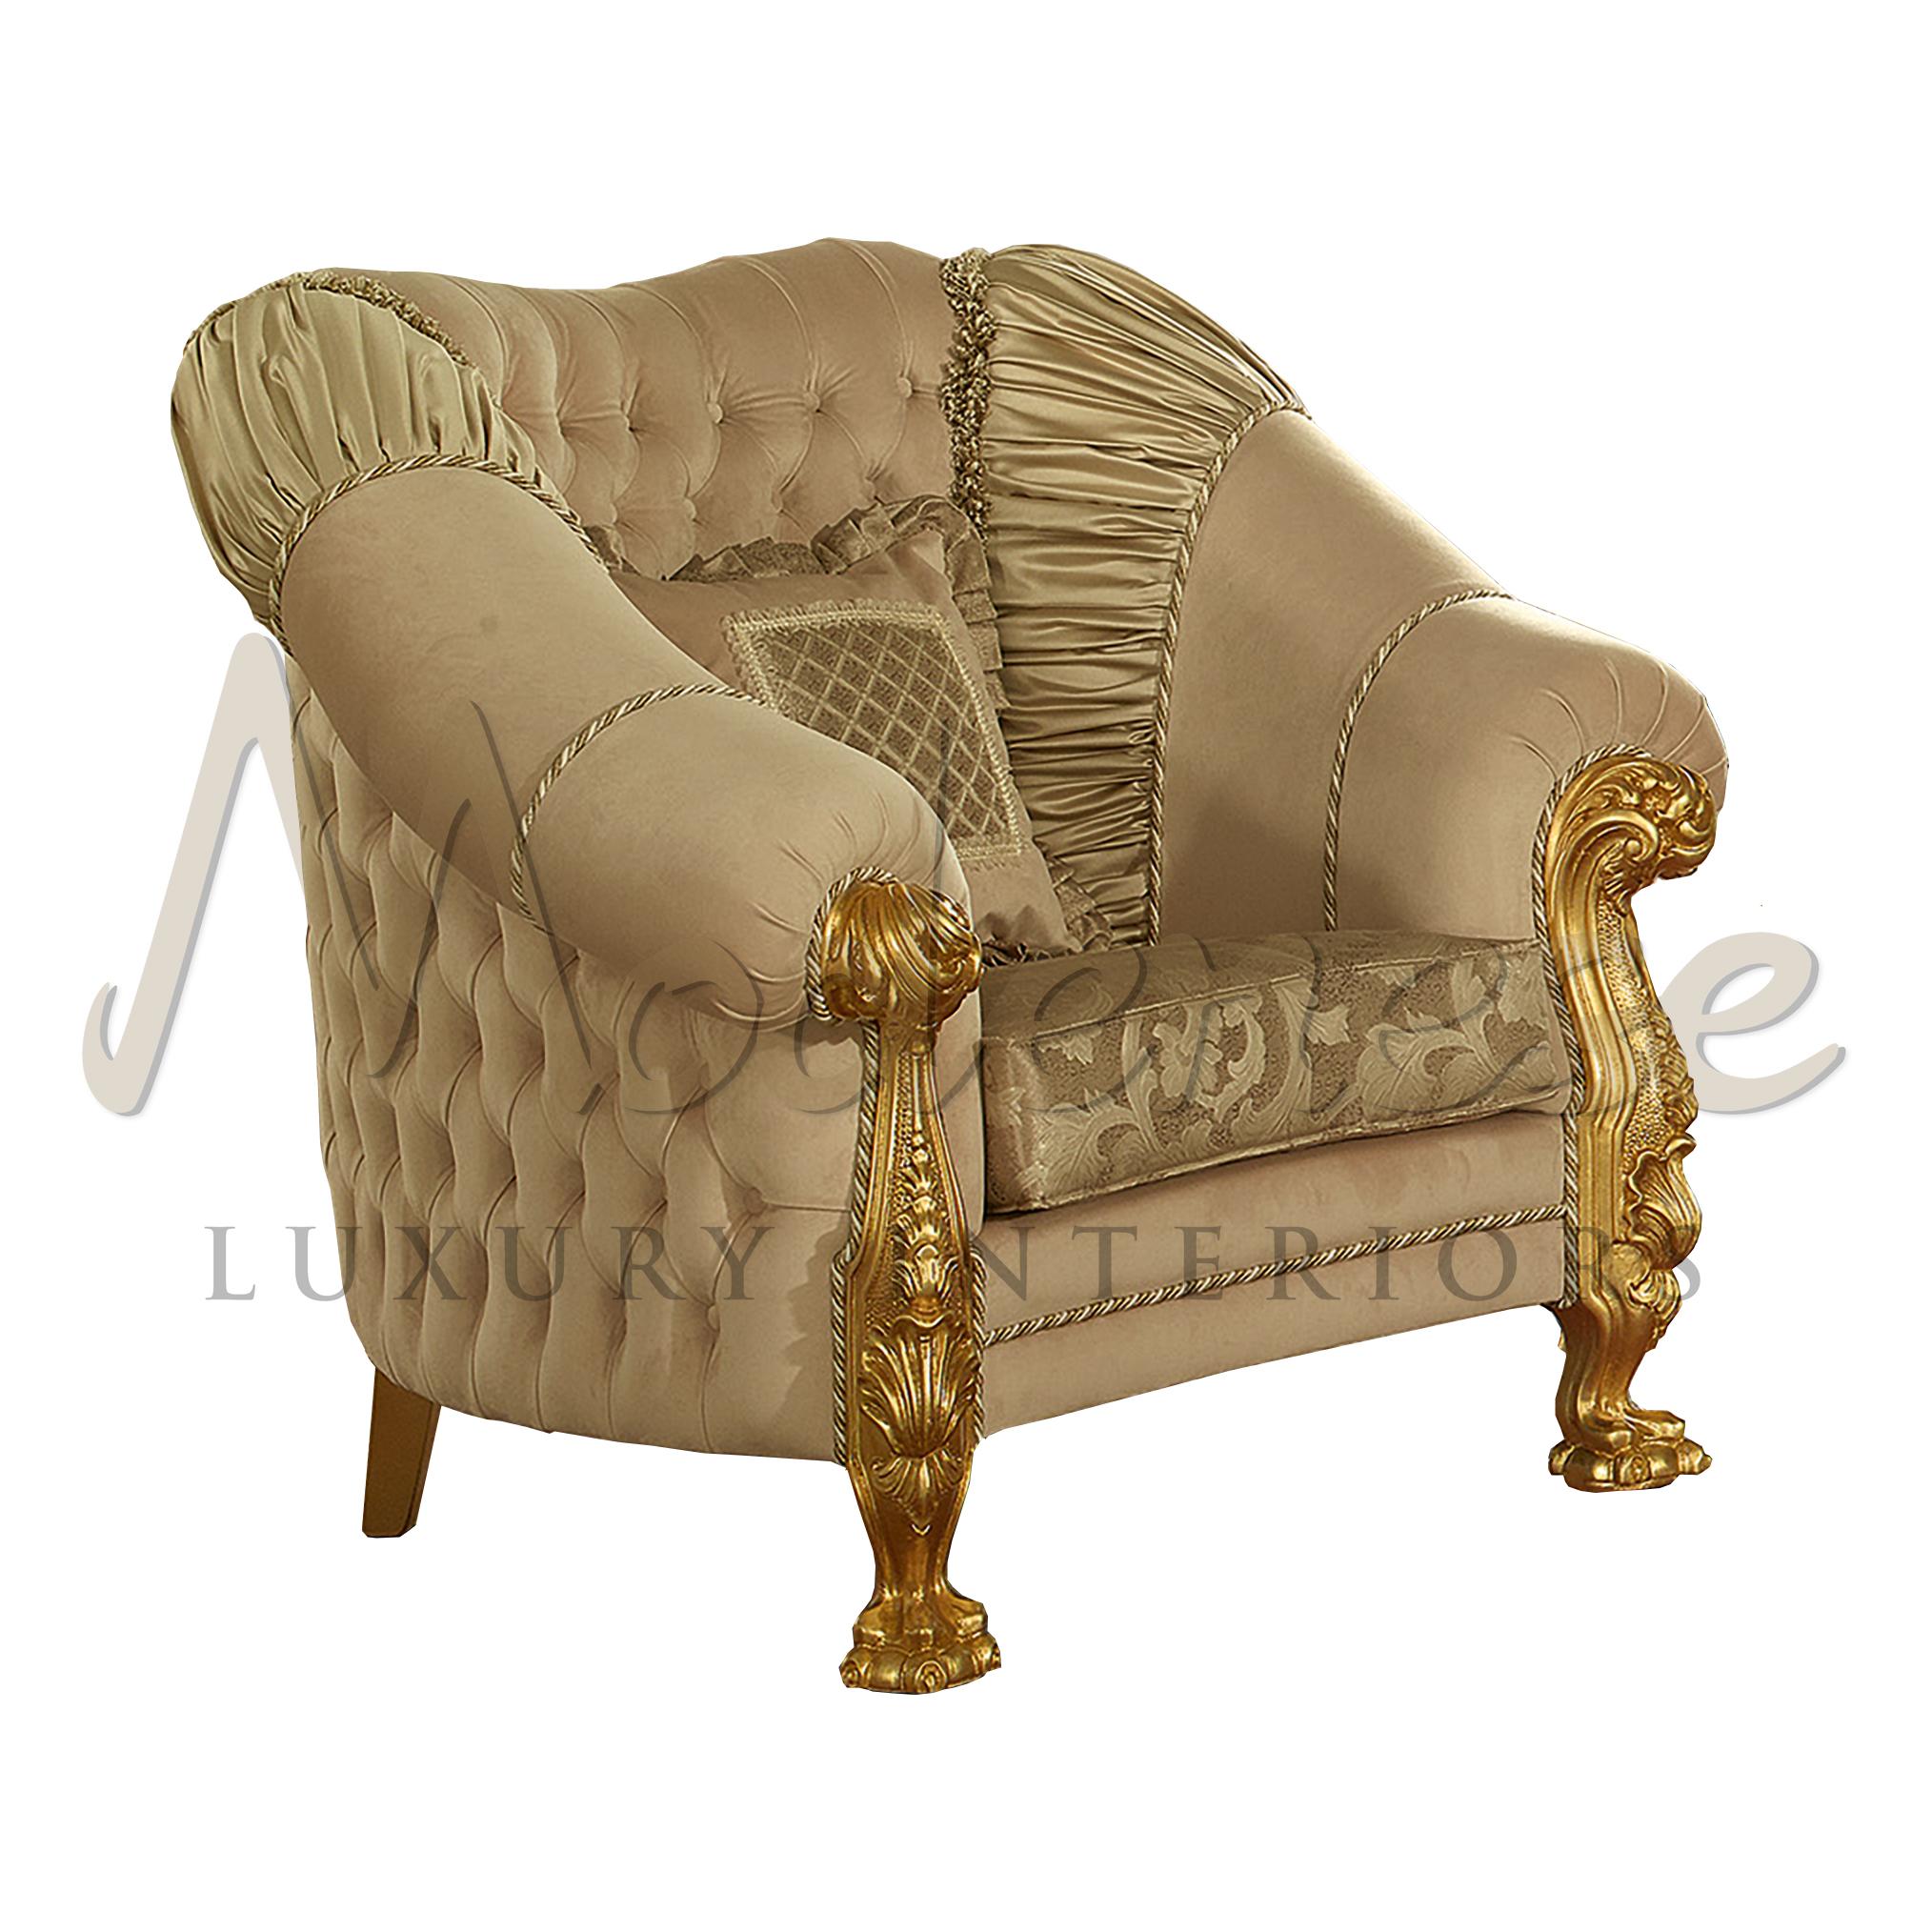 Luxury capitonne armchair with unique lion foot carved design. The seats are in mixed fabric and leather pattern. The capitonne upholstering is elegant in shape but yet very comfortable waraping around the outer and inner part of the chair.